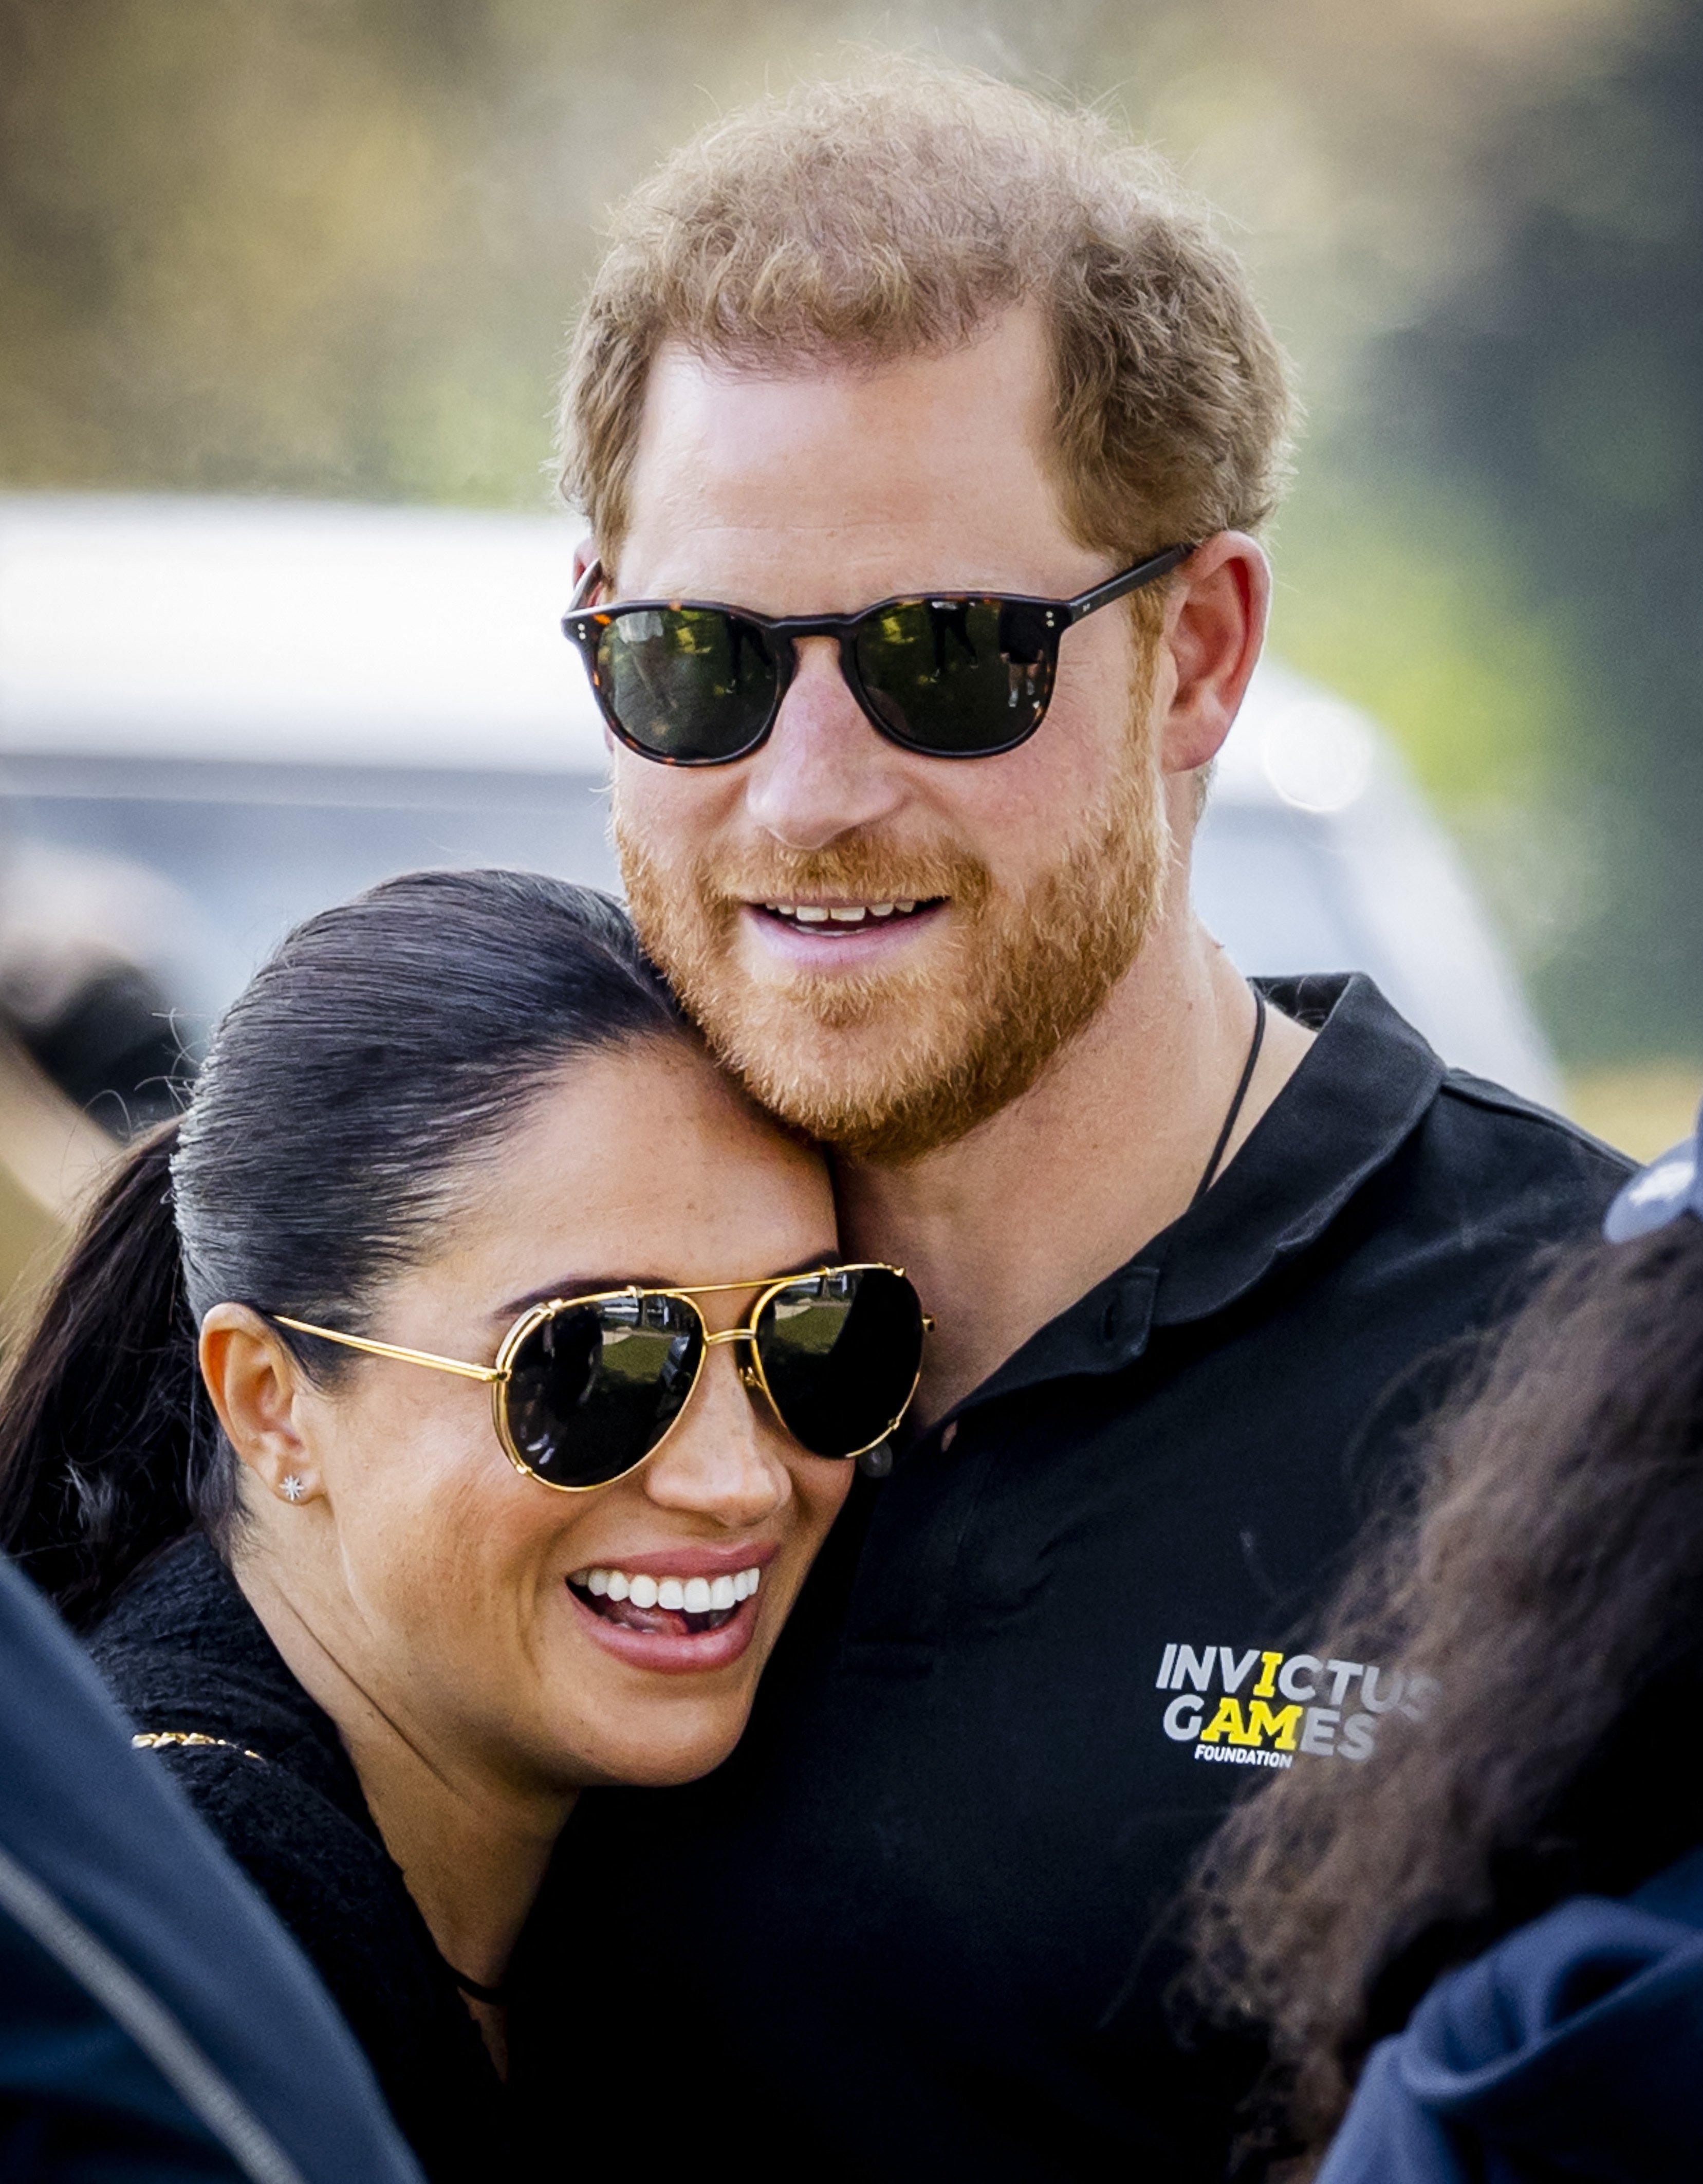 Duke and Duchess of Sussex, Prince Harry and his wife, Meghan Markle, embrace at The Invictus Games in The Hague on April 16, 2022. | Source: Getty Images